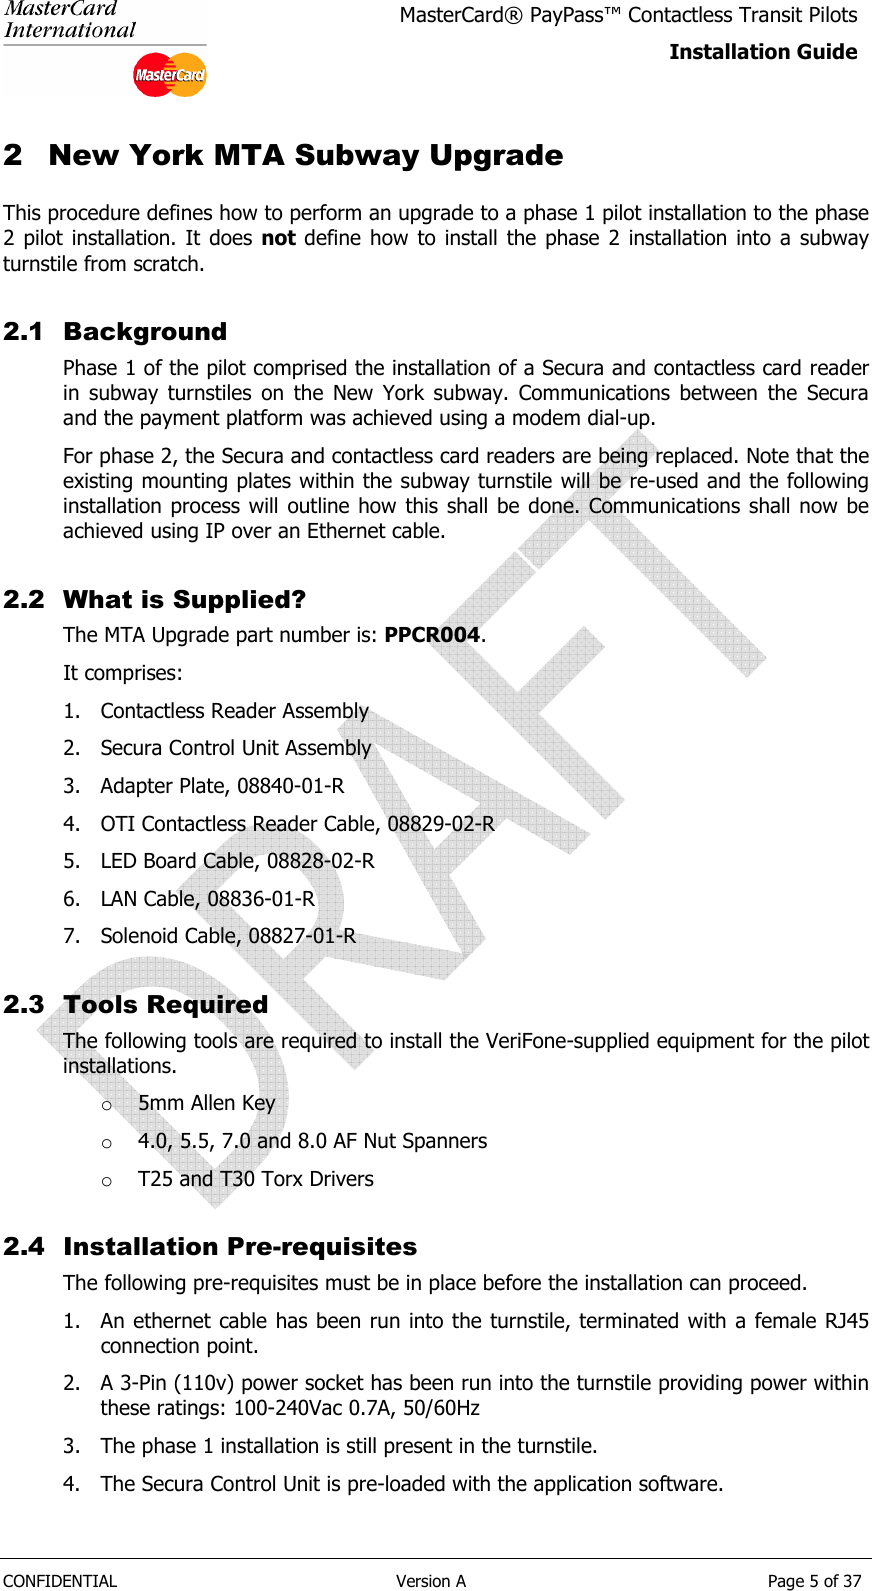   CONFIDENTIAL  Version A  Page 5 of 37 MasterCard® PayPass™ Contactless Transit Pilots Installation Guide  2 New York MTA Subway Upgrade This procedure defines how to perform an upgrade to a phase 1 pilot installation to the phase 2 pilot  installation. It  does not define  how  to install the phase  2  installation  into  a  subway turnstile from scratch.  2.1 Background Phase 1 of the pilot comprised the installation of a Secura and contactless card reader in  subway  turnstiles  on  the  New  York  subway.  Communications  between  the  Secura and the payment platform was achieved using a modem dial-up. For phase 2, the Secura and contactless card readers are being replaced. Note that the existing mounting plates within the subway turnstile will be re-used and the following installation  process  will outline how  this  shall  be done. Communications  shall now be achieved using IP over an Ethernet cable. 2.2 What is Supplied? The MTA Upgrade part number is: PPCR004. It comprises: 1. Contactless Reader Assembly 2. Secura Control Unit Assembly 3. Adapter Plate, 08840-01-R 4. OTI Contactless Reader Cable, 08829-02-R 5. LED Board Cable, 08828-02-R 6. LAN Cable, 08836-01-R 7. Solenoid Cable, 08827-01-R 2.3 Tools Required The following tools are required to install the VeriFone-supplied equipment for the pilot installations. o 5mm Allen Key o 4.0, 5.5, 7.0 and 8.0 AF Nut Spanners o T25 and T30 Torx Drivers 2.4 Installation Pre-requisites The following pre-requisites must be in place before the installation can proceed. 1. An ethernet cable has been run into the turnstile, terminated with a female RJ45 connection point. 2. A 3-Pin (110v) power socket has been run into the turnstile providing power within these ratings: 100-240Vac 0.7A, 50/60Hz 3. The phase 1 installation is still present in the turnstile. 4. The Secura Control Unit is pre-loaded with the application software. 